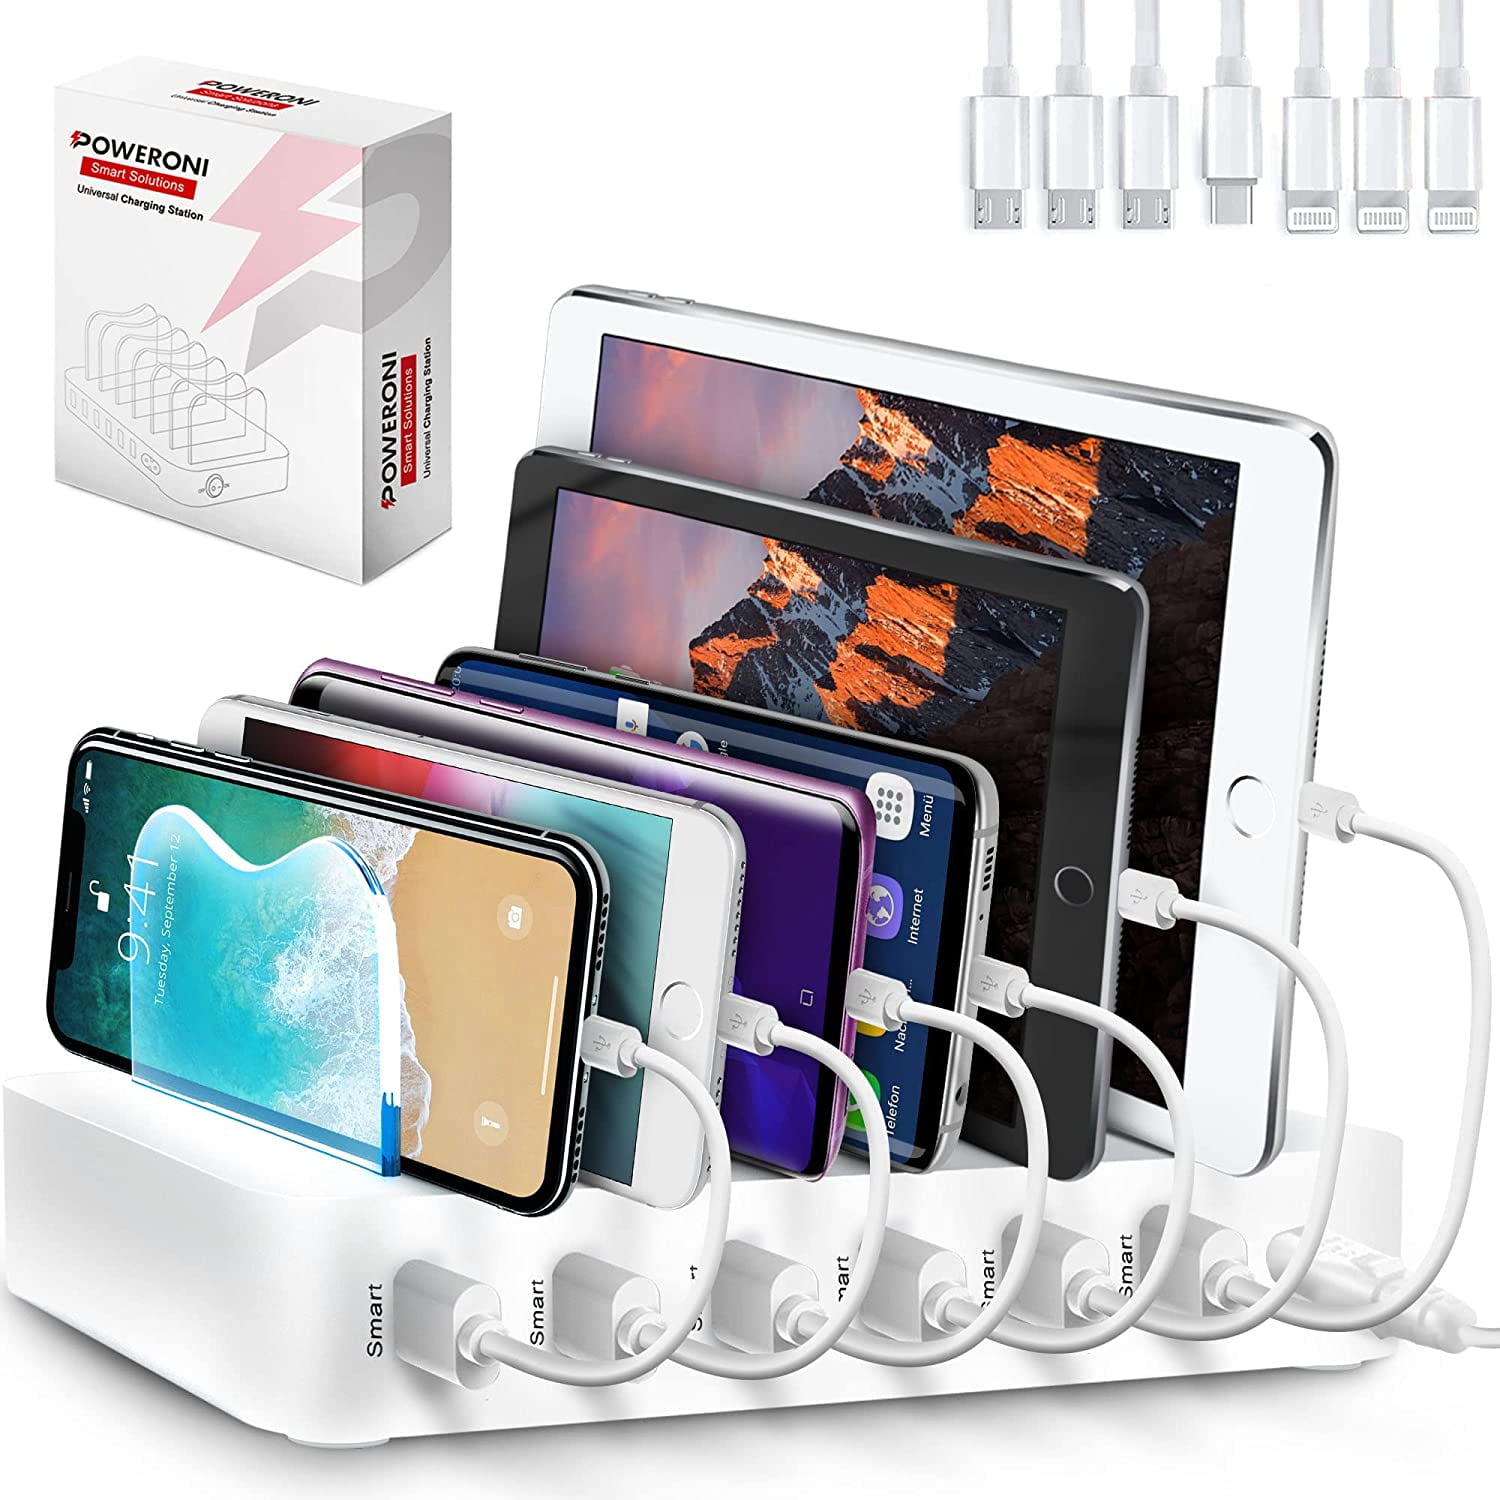 Kondensere Energize Bore Poweroni USB Charging Station Dock - 6-Port - Fast Charge Docking Station  for Multiple Devices - Multi Device Charger Organizer - Compatible with  iPad iPhone and Android Cell Phone and Tablet - White - Walmart.com